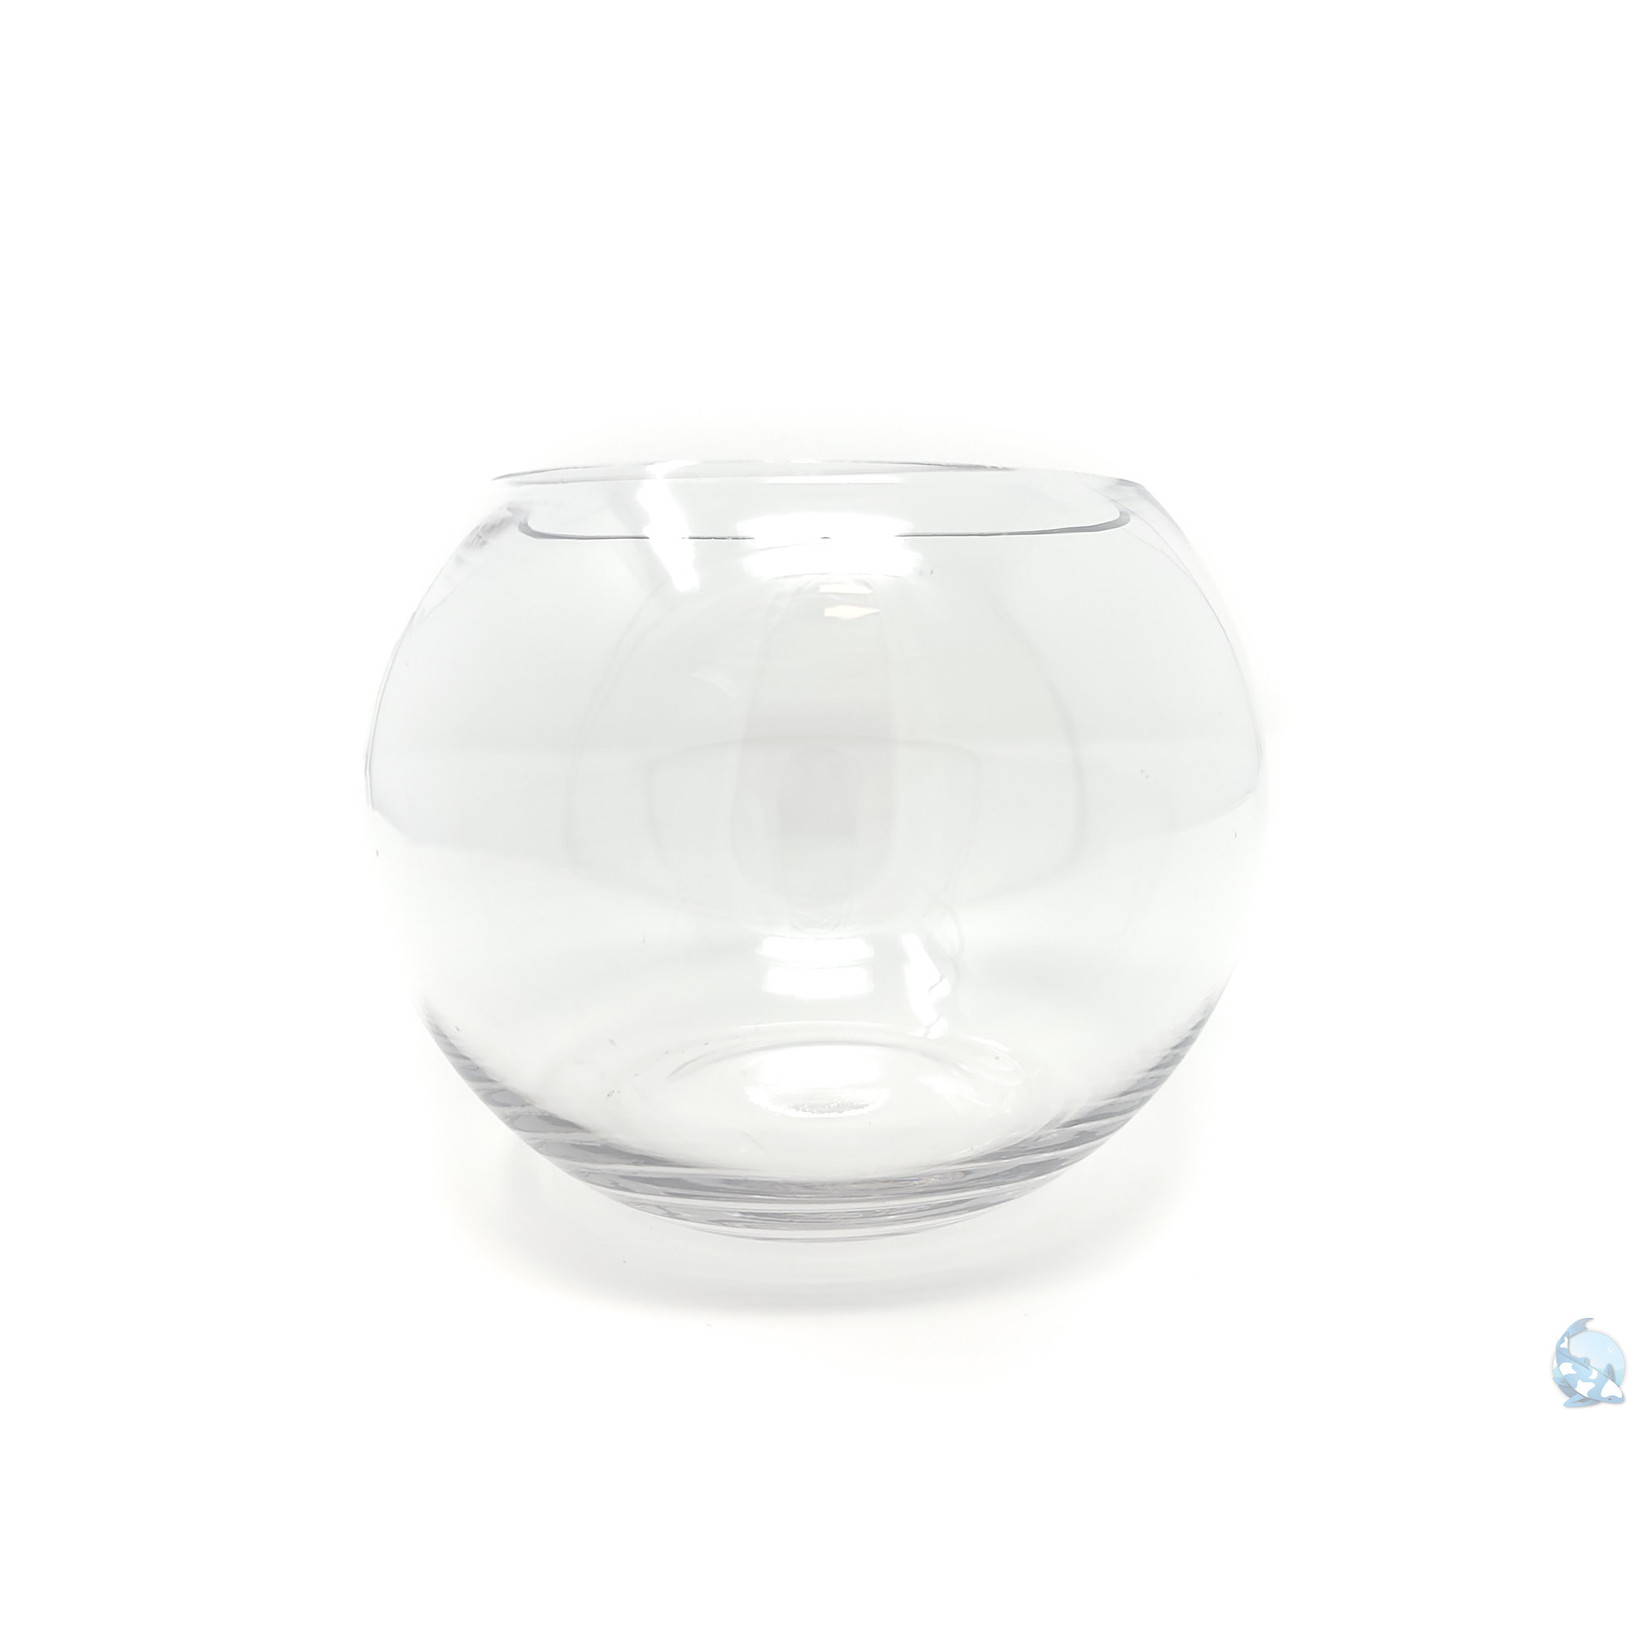 Nuterro Solutions Glass Bowl - 6 inch